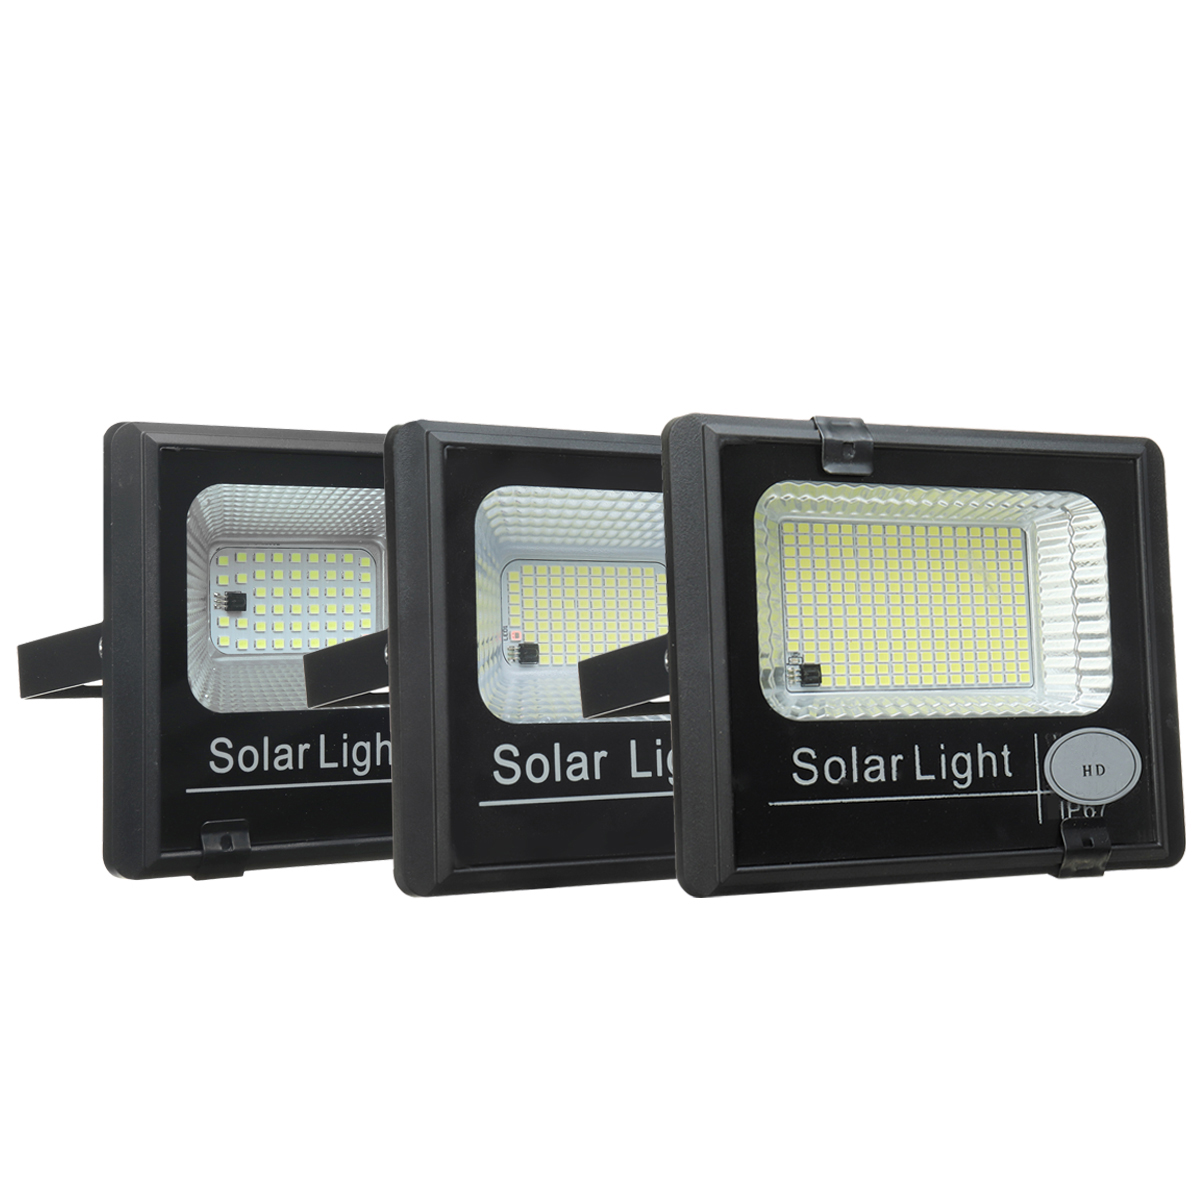 LED-Solar-Flood-Light-with-Remote-Control-Wall-Lamp-IP67-Waterproof-Solar-Powered-Lamp-for-Outdoor-G-1880477-9